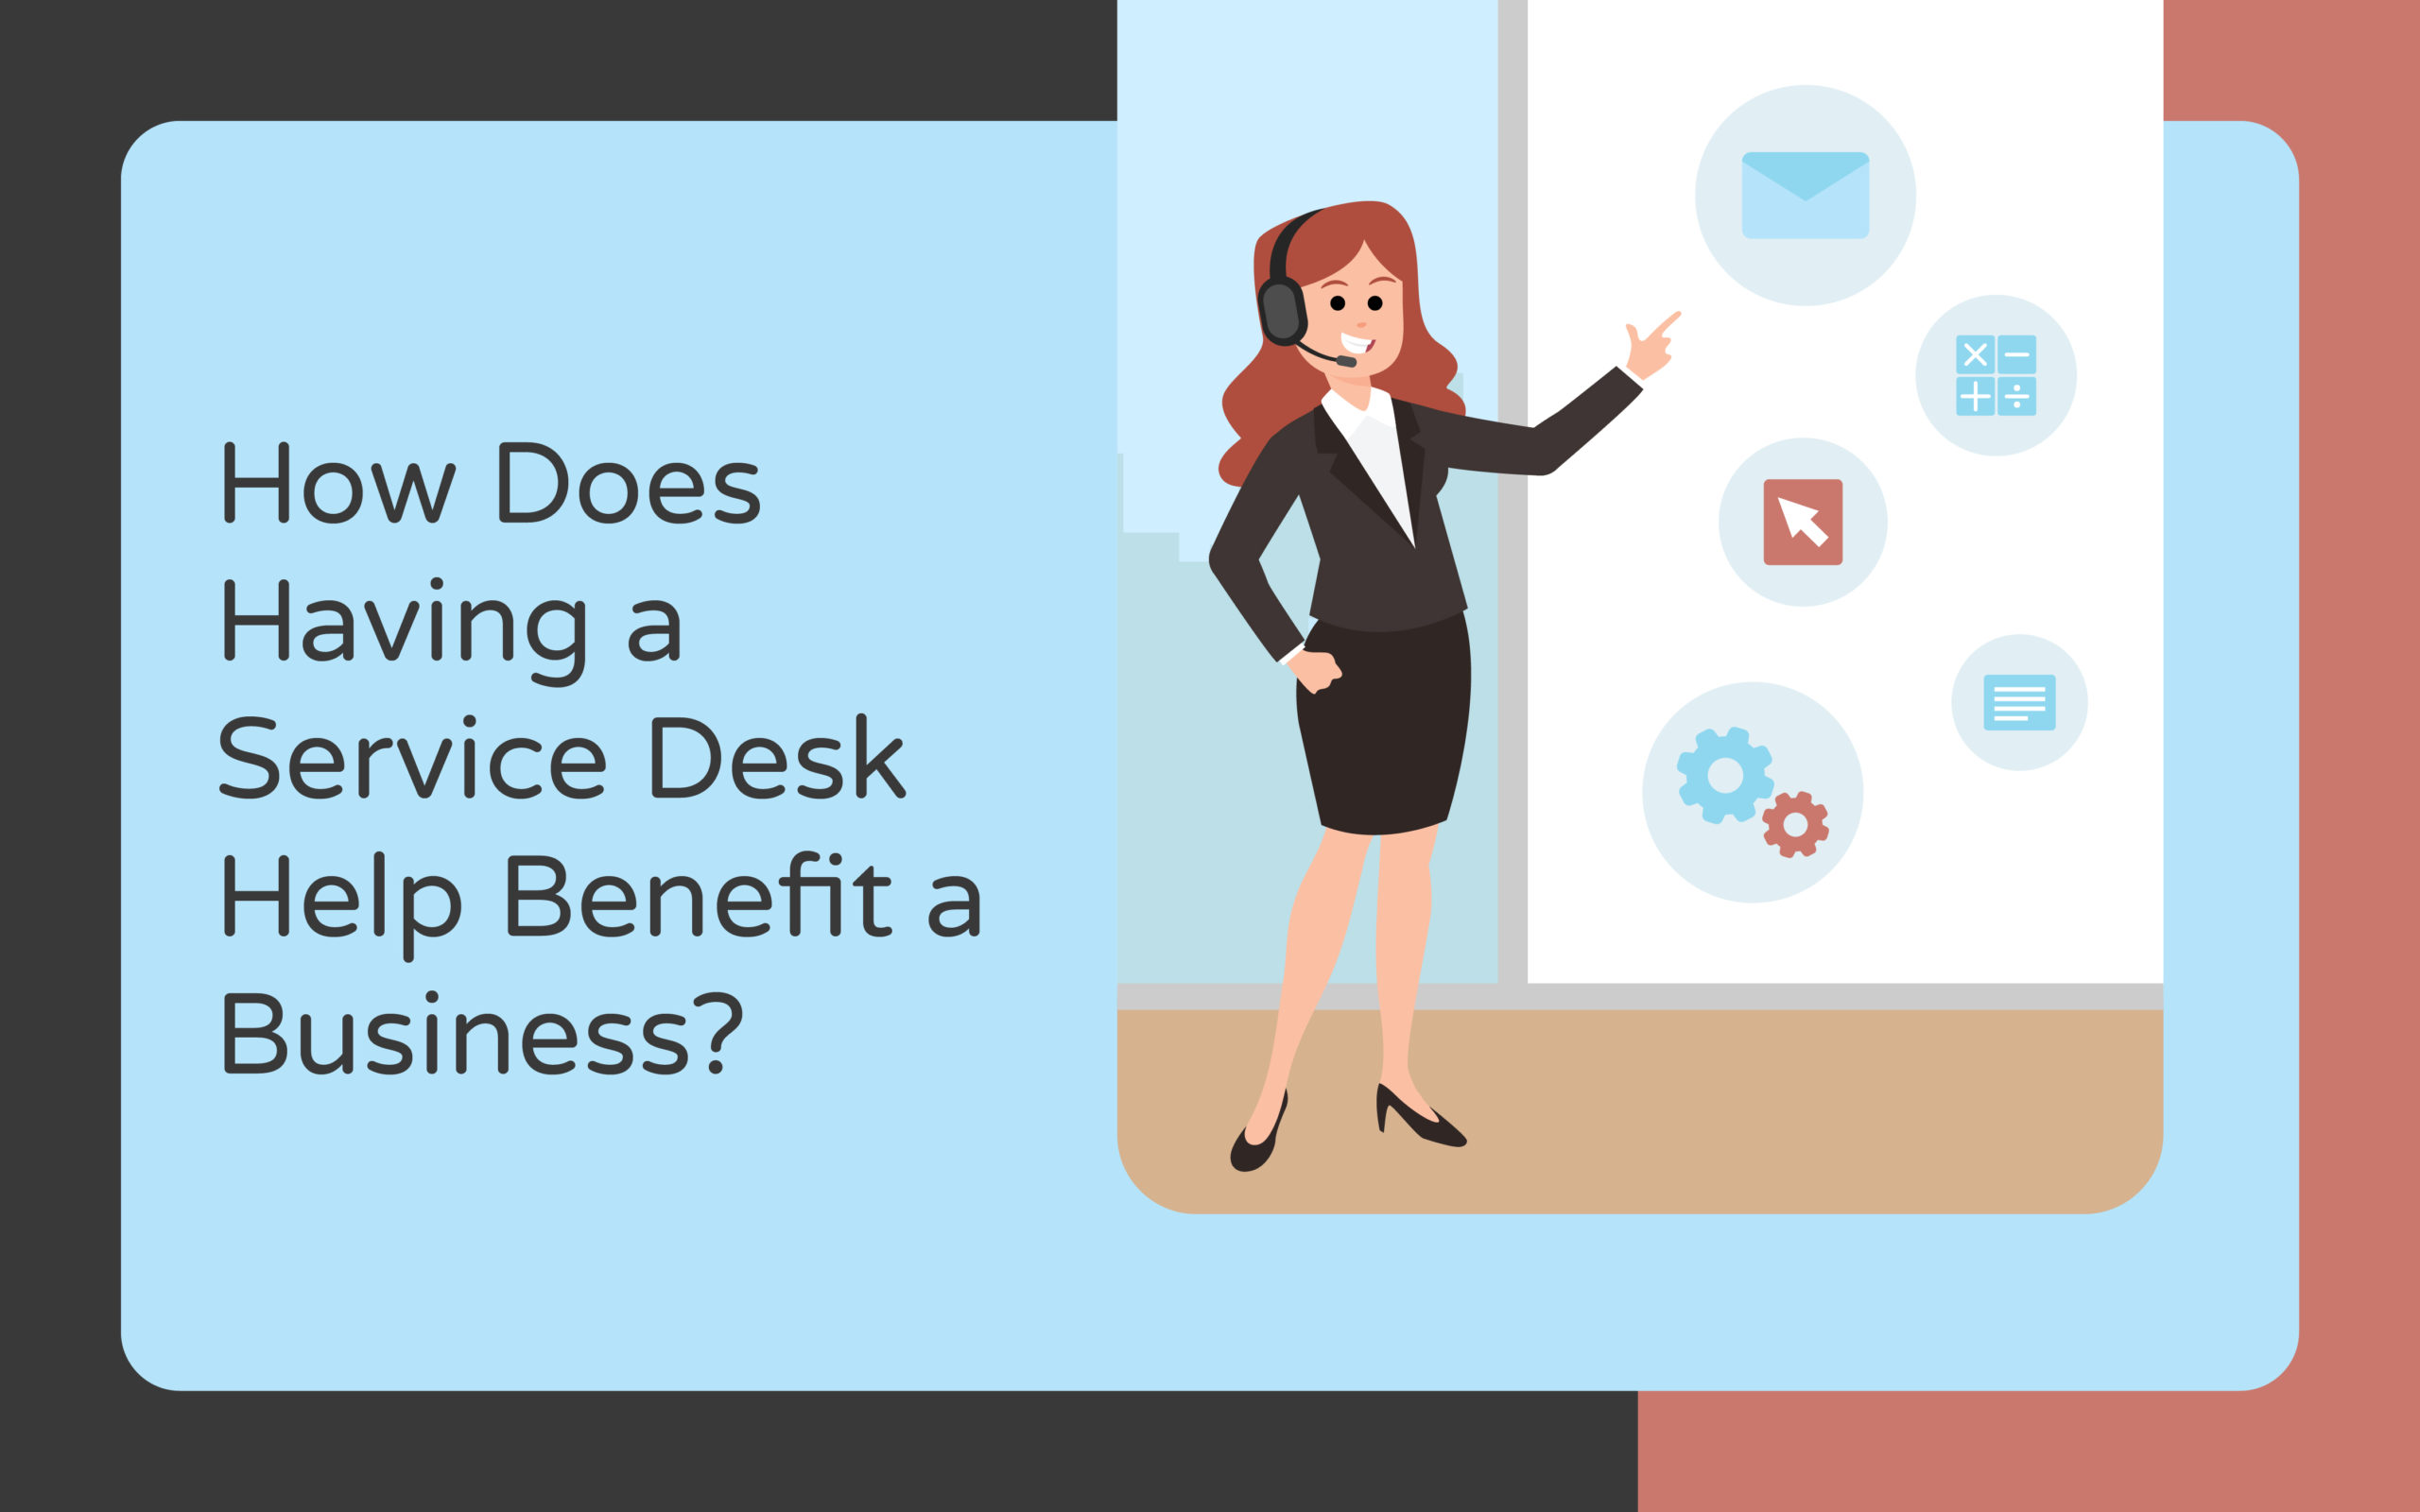 How Does Having a Service Desk Help Benefit a Business